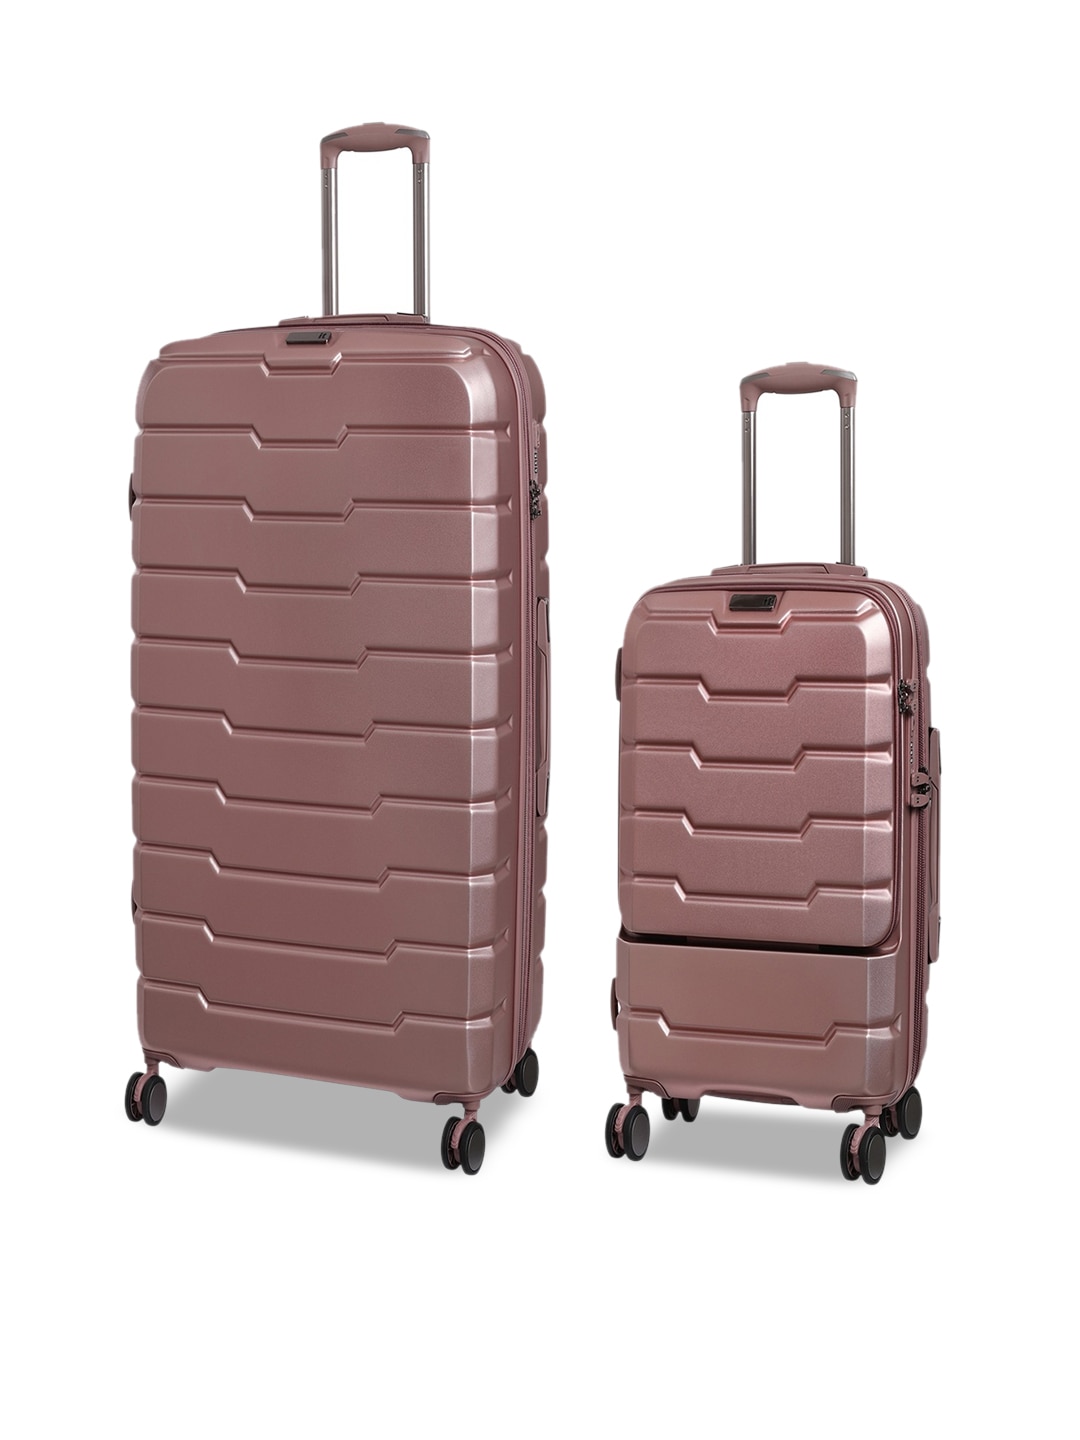 IT luggage Set of 2 Pink Cushion-Lux 360 Degree Rotation Hard-Sided Trolley Suitcases Price in India